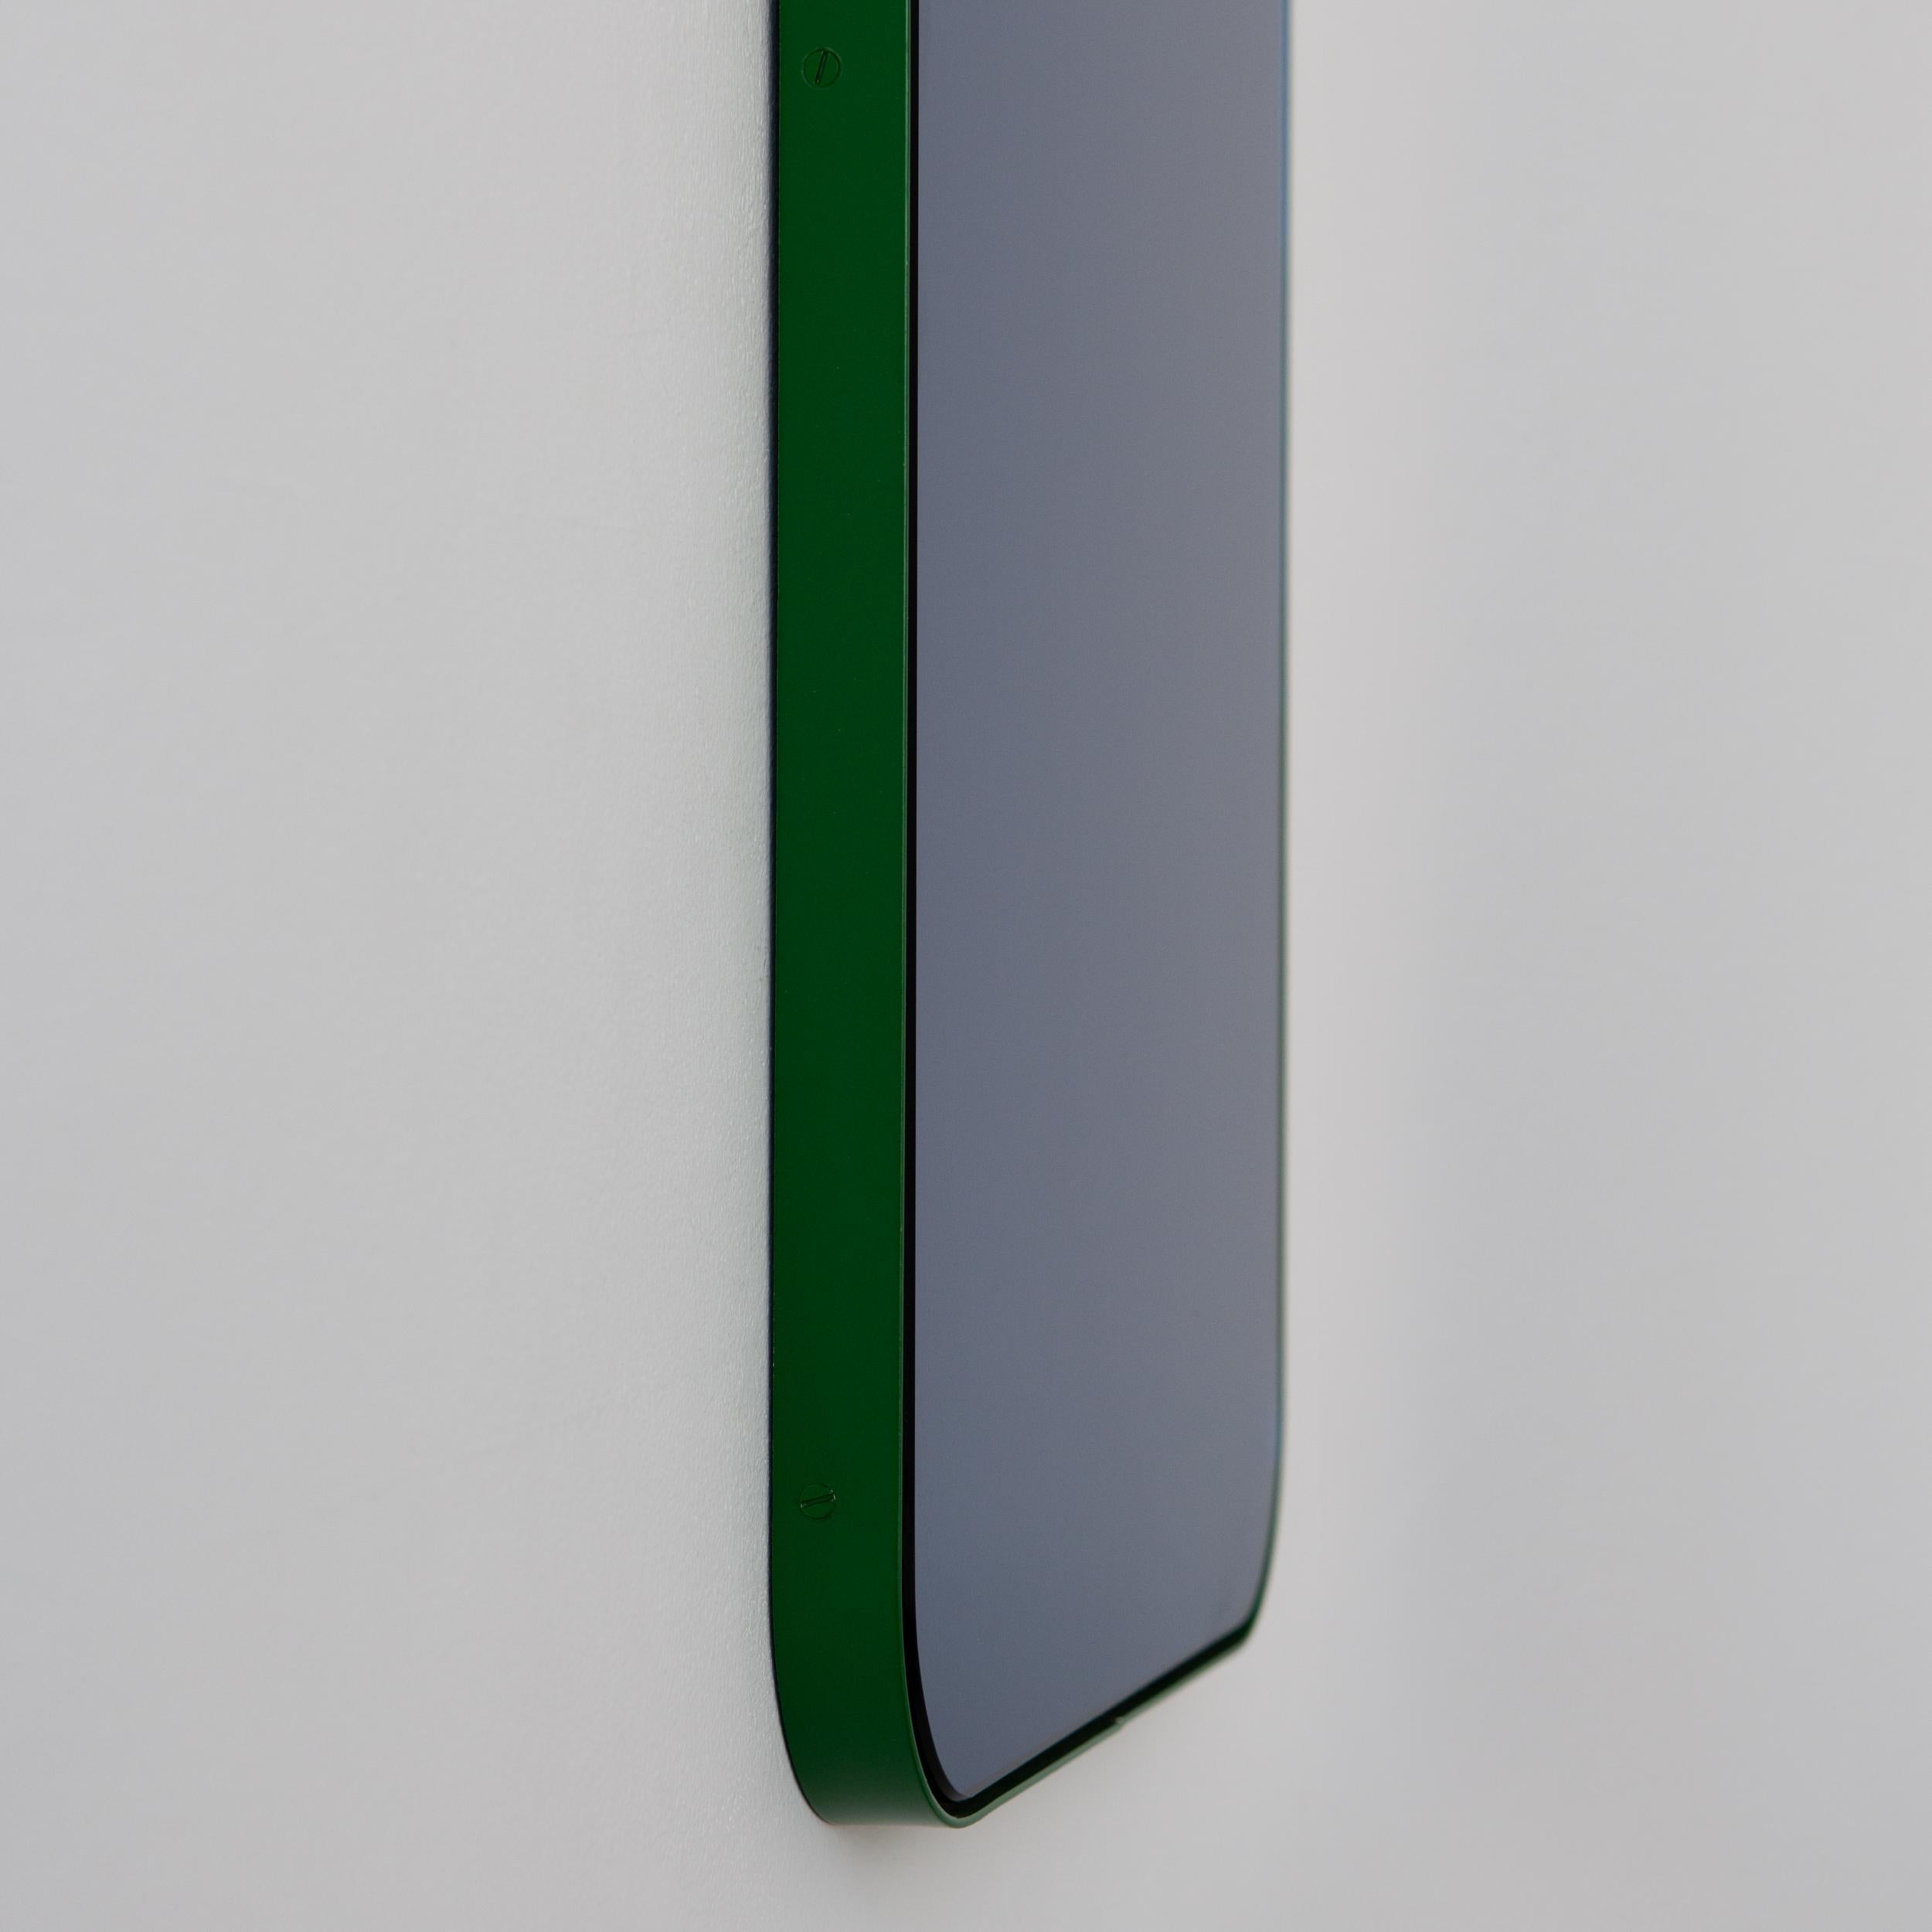 Quadris Rectangular Contemporary Blue Mirror with a Green Frame, Medium In New Condition For Sale In London, GB